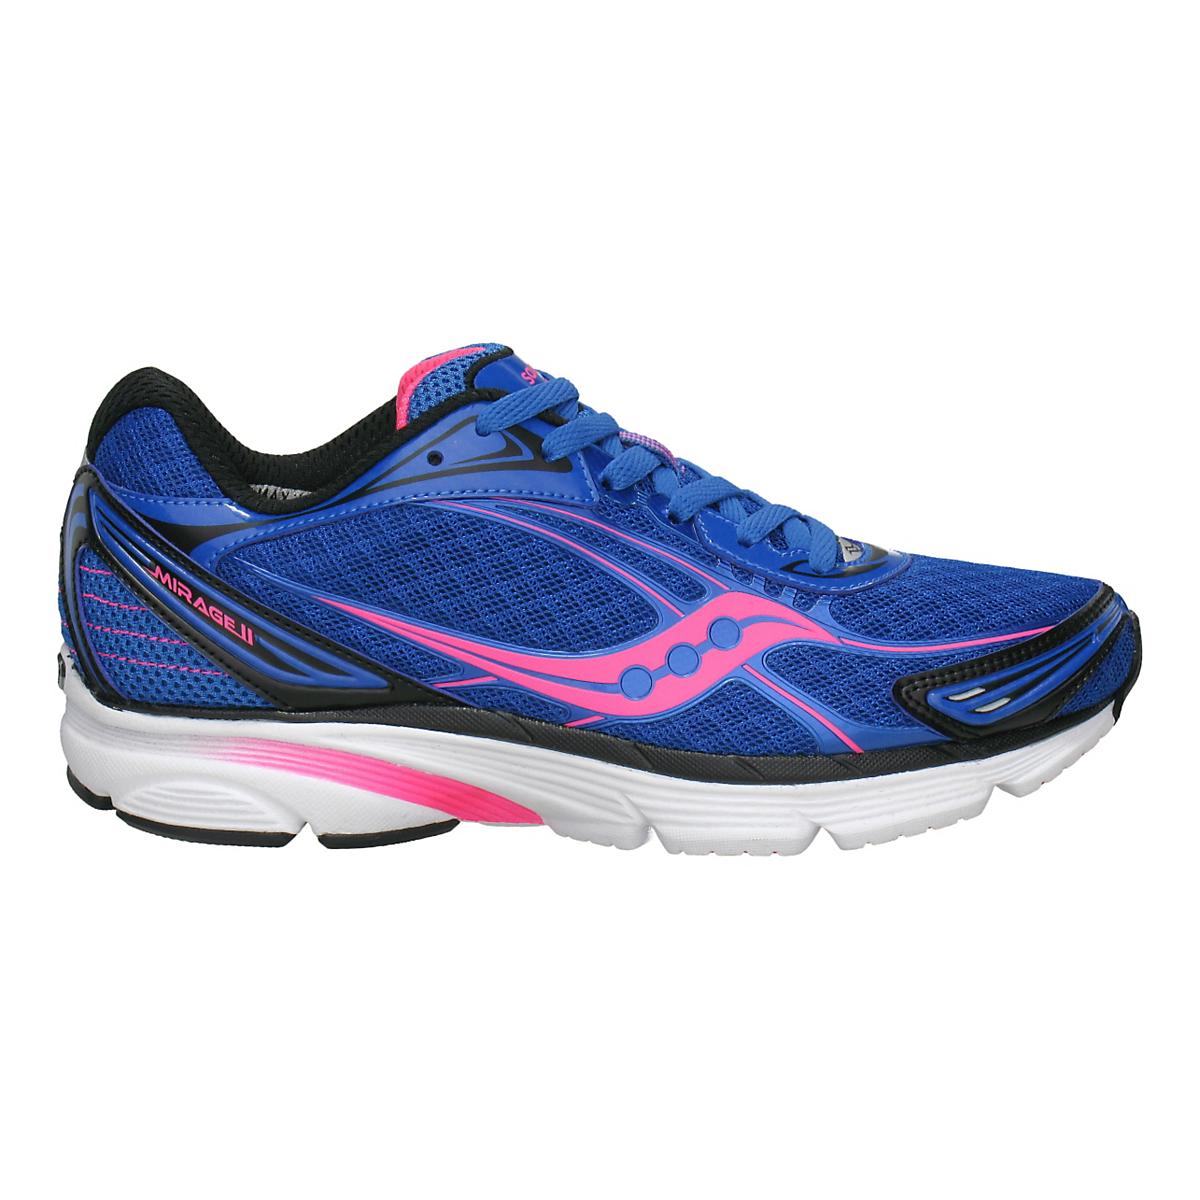 Womens Saucony ProGrid Mirage 2 Running Shoe at Road Runner Sports